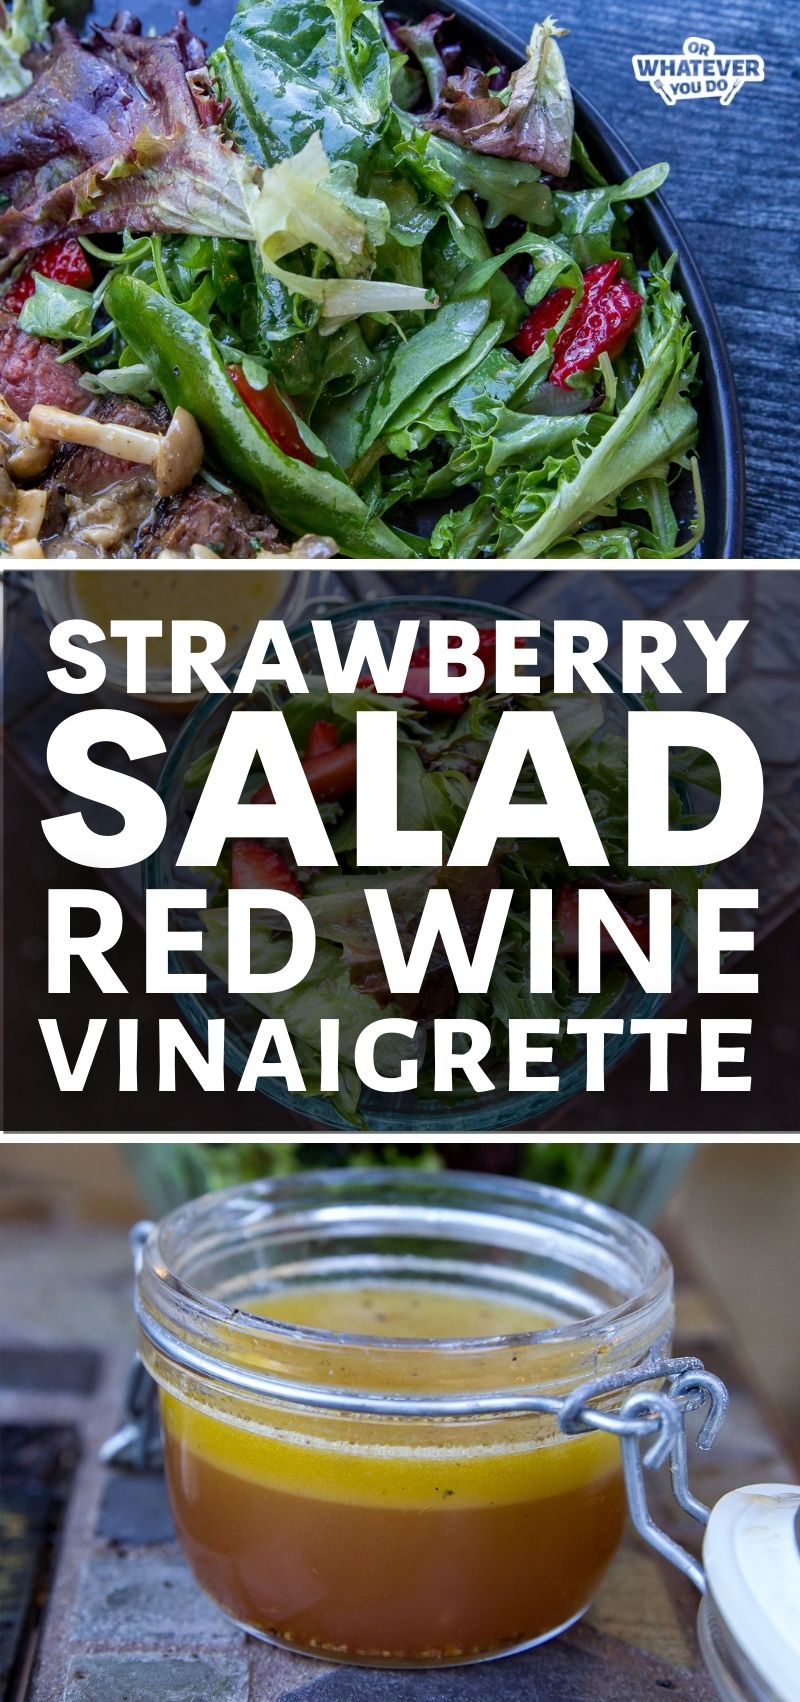 Strawberry Salad with Red Wine Vinaigrette